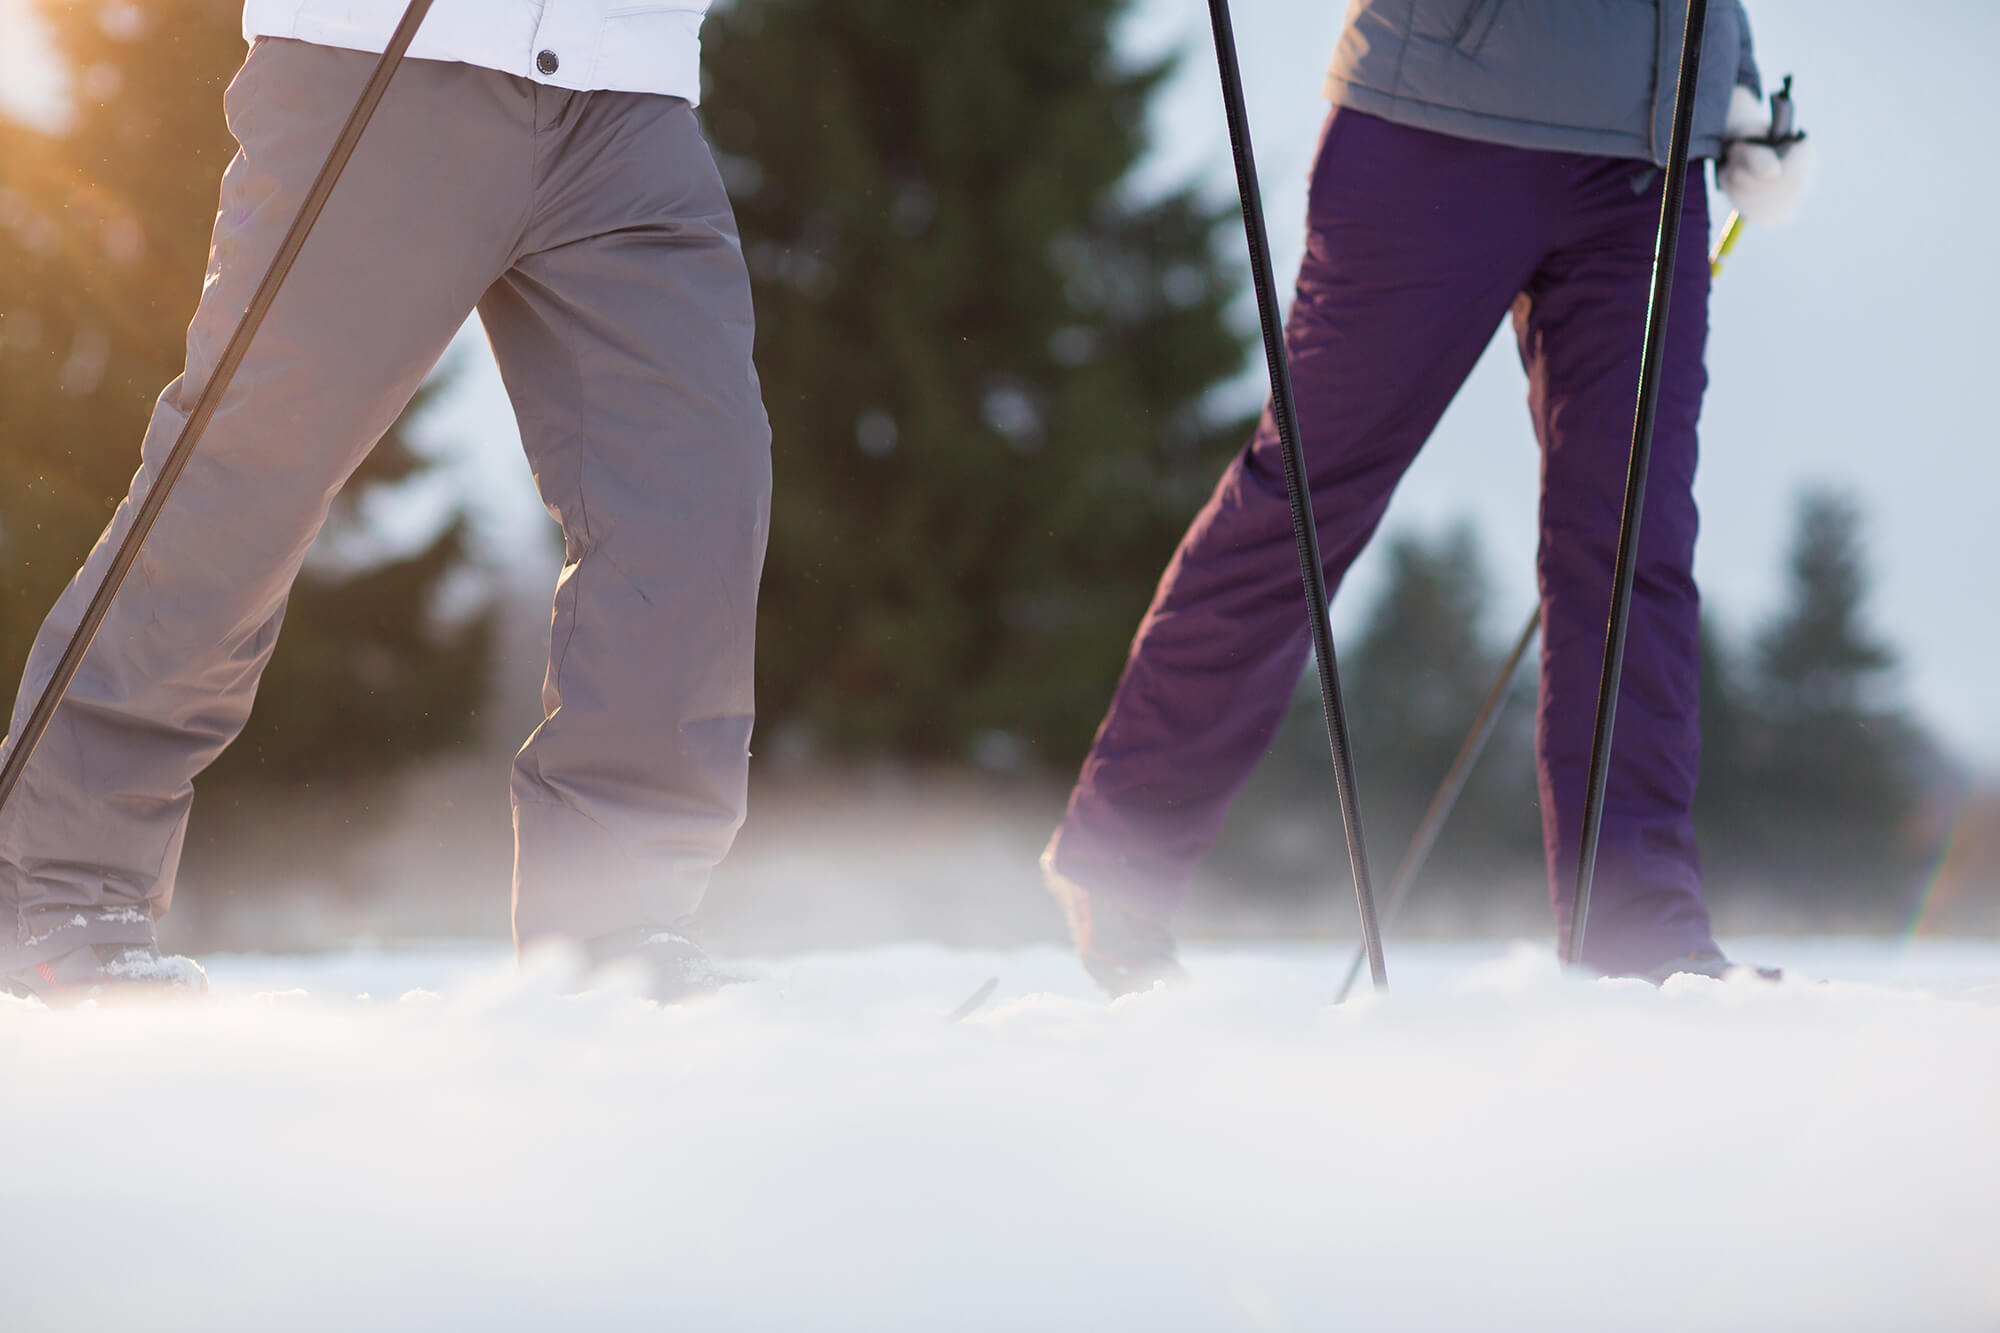 Tips for Protecting Your Joints While Doing Winter Sports